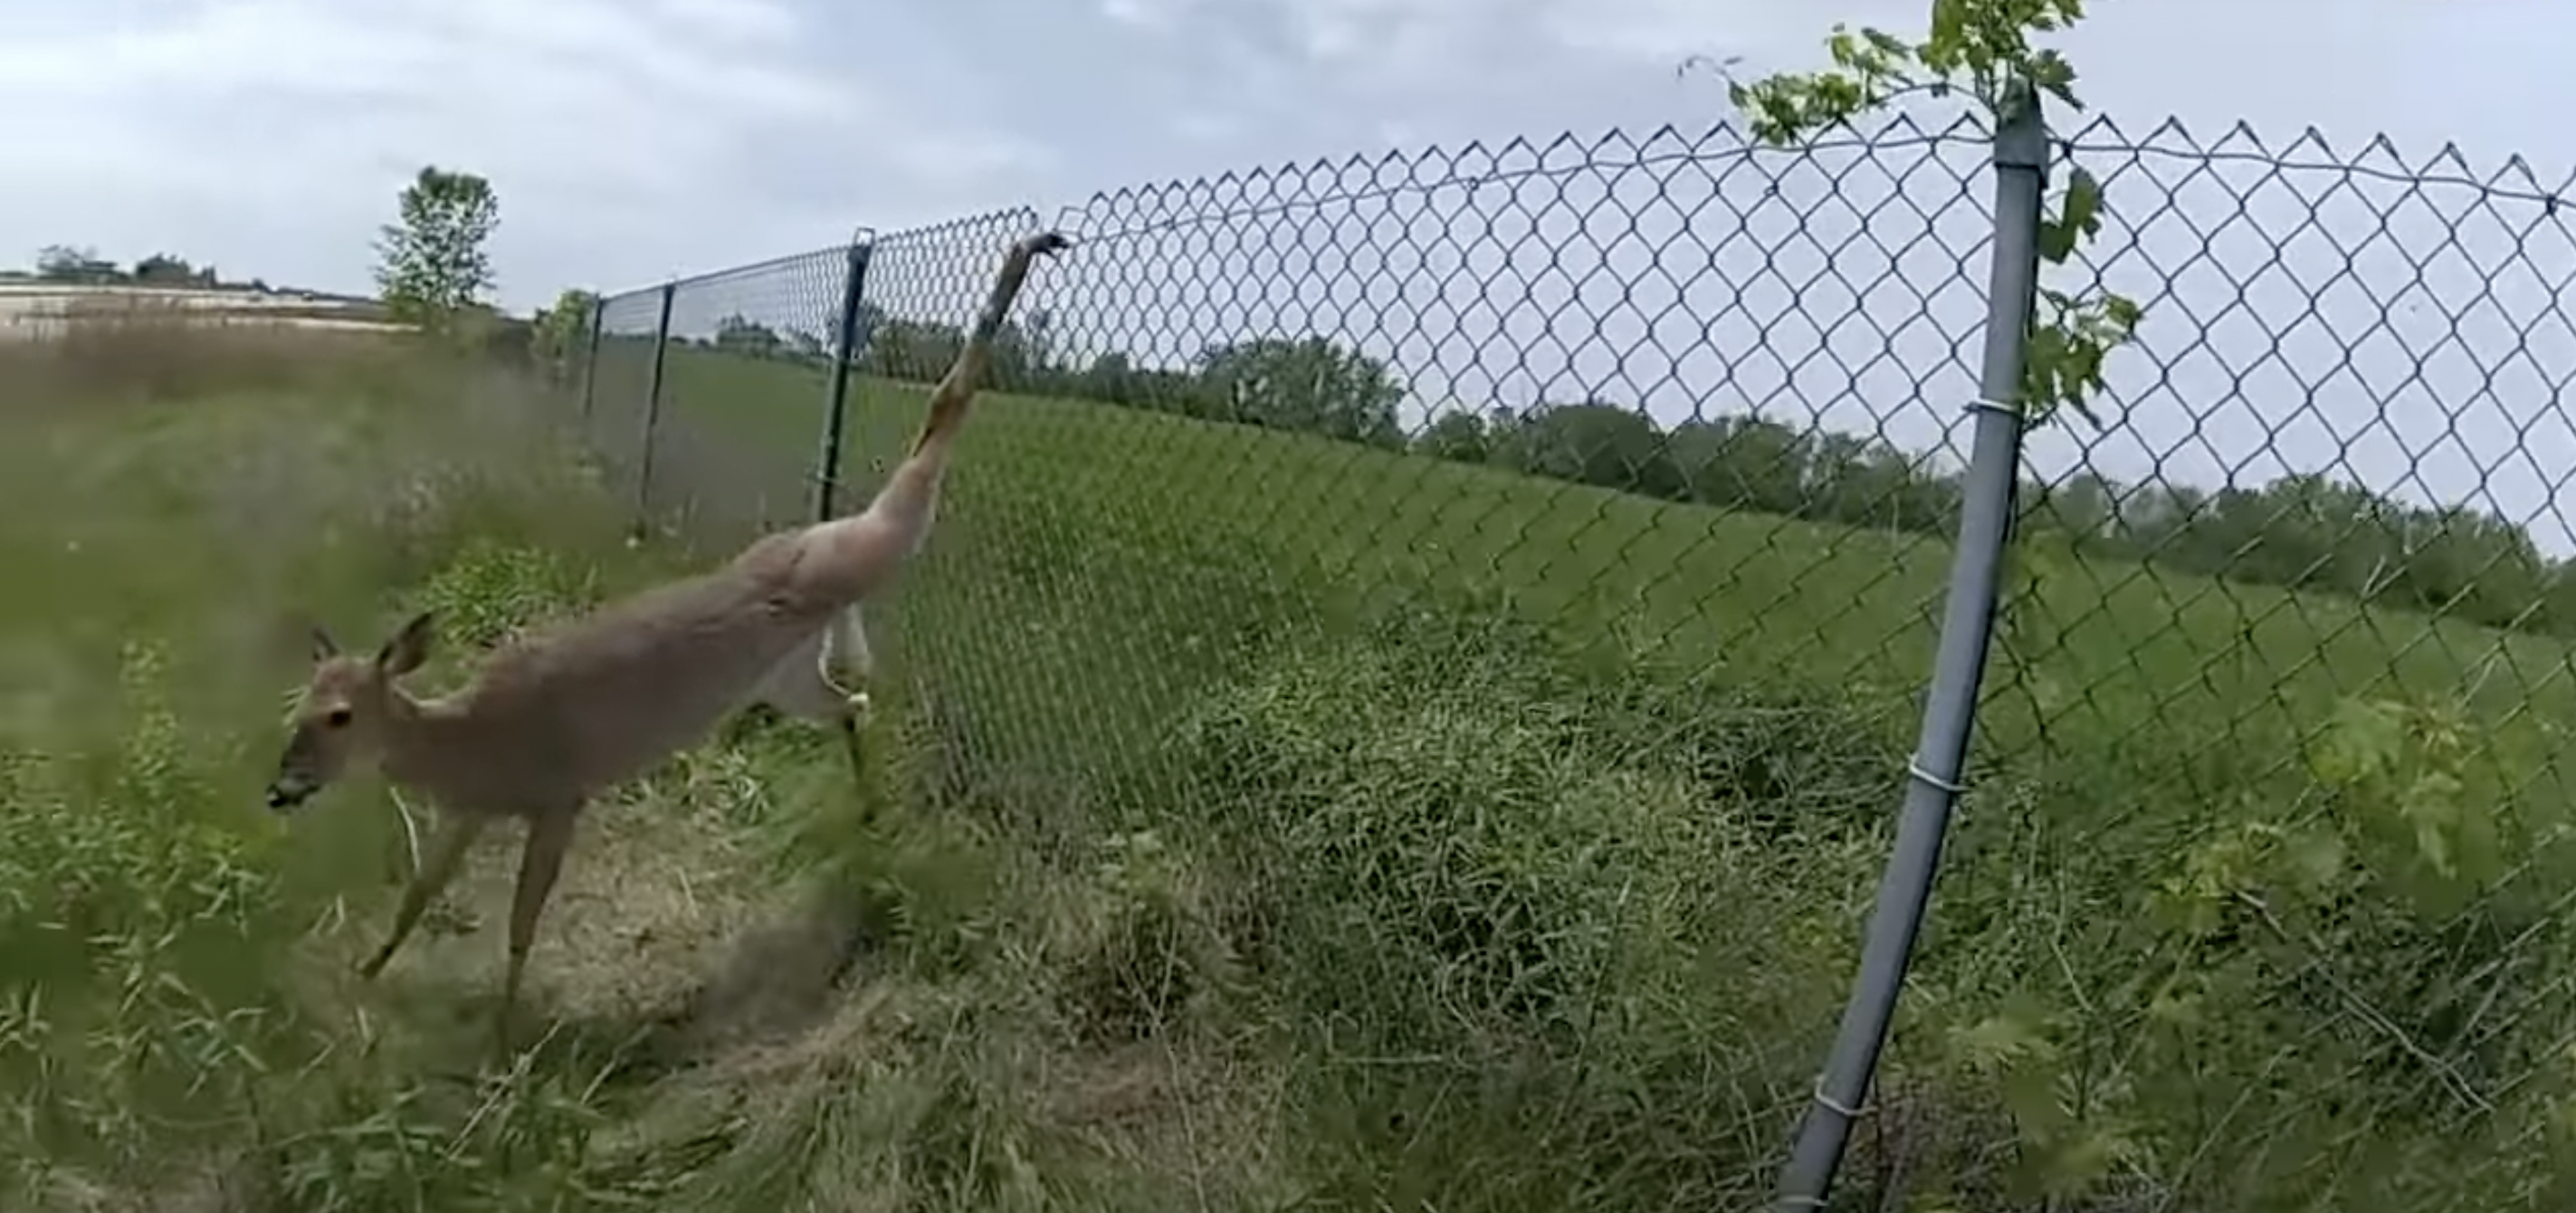 A whitetail doe was freed from this fenceline.